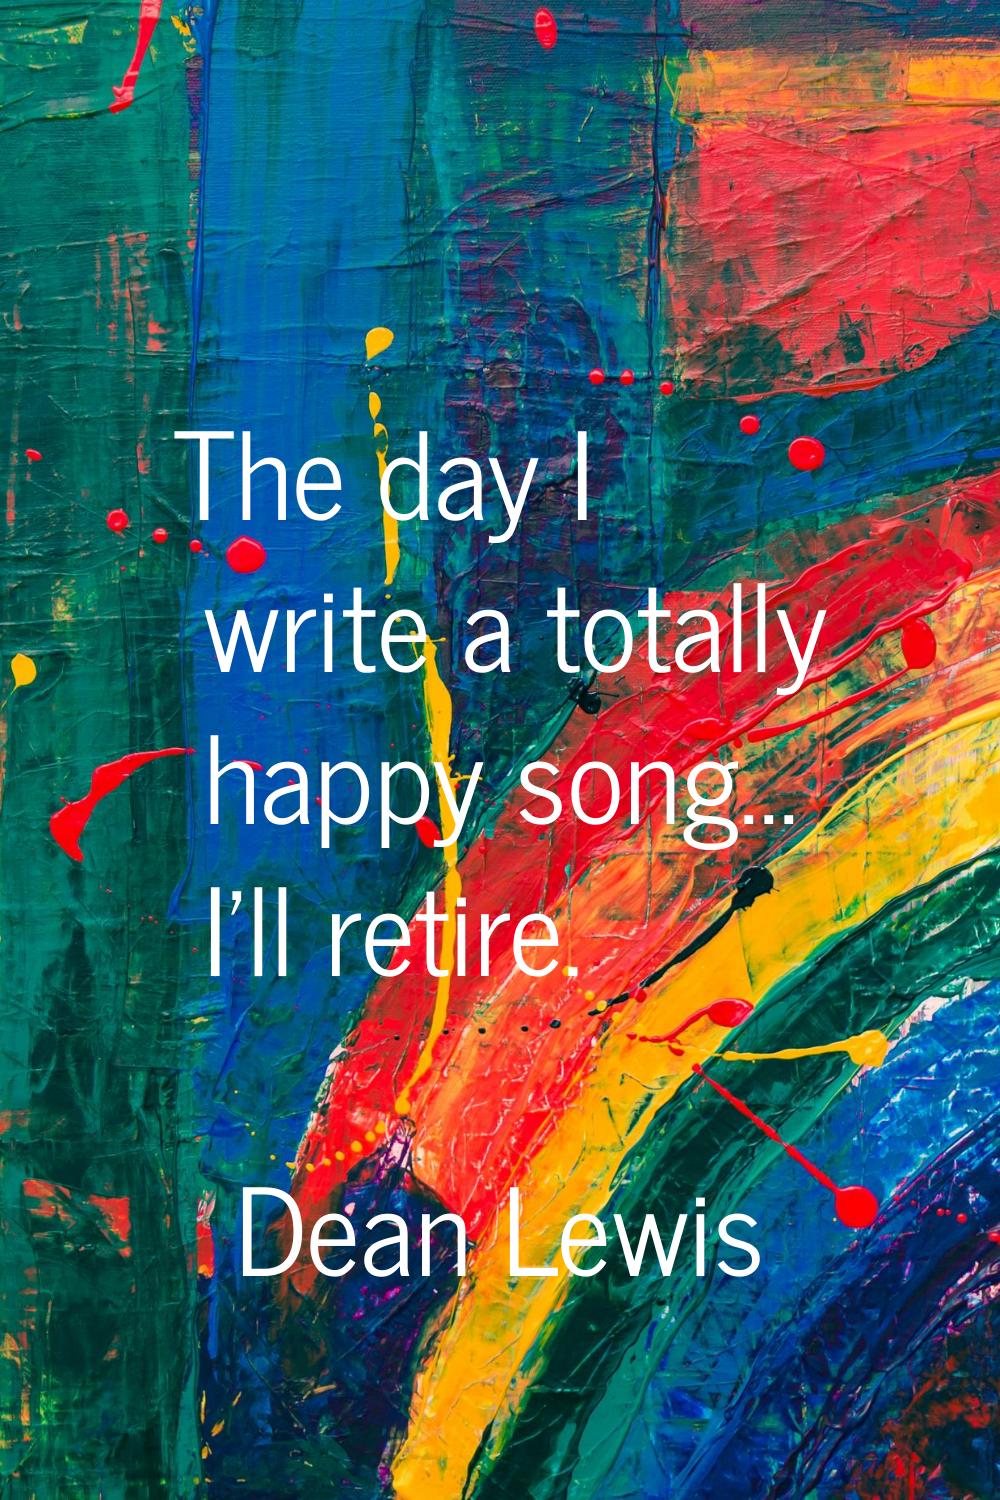 The day I write a totally happy song... I'll retire.